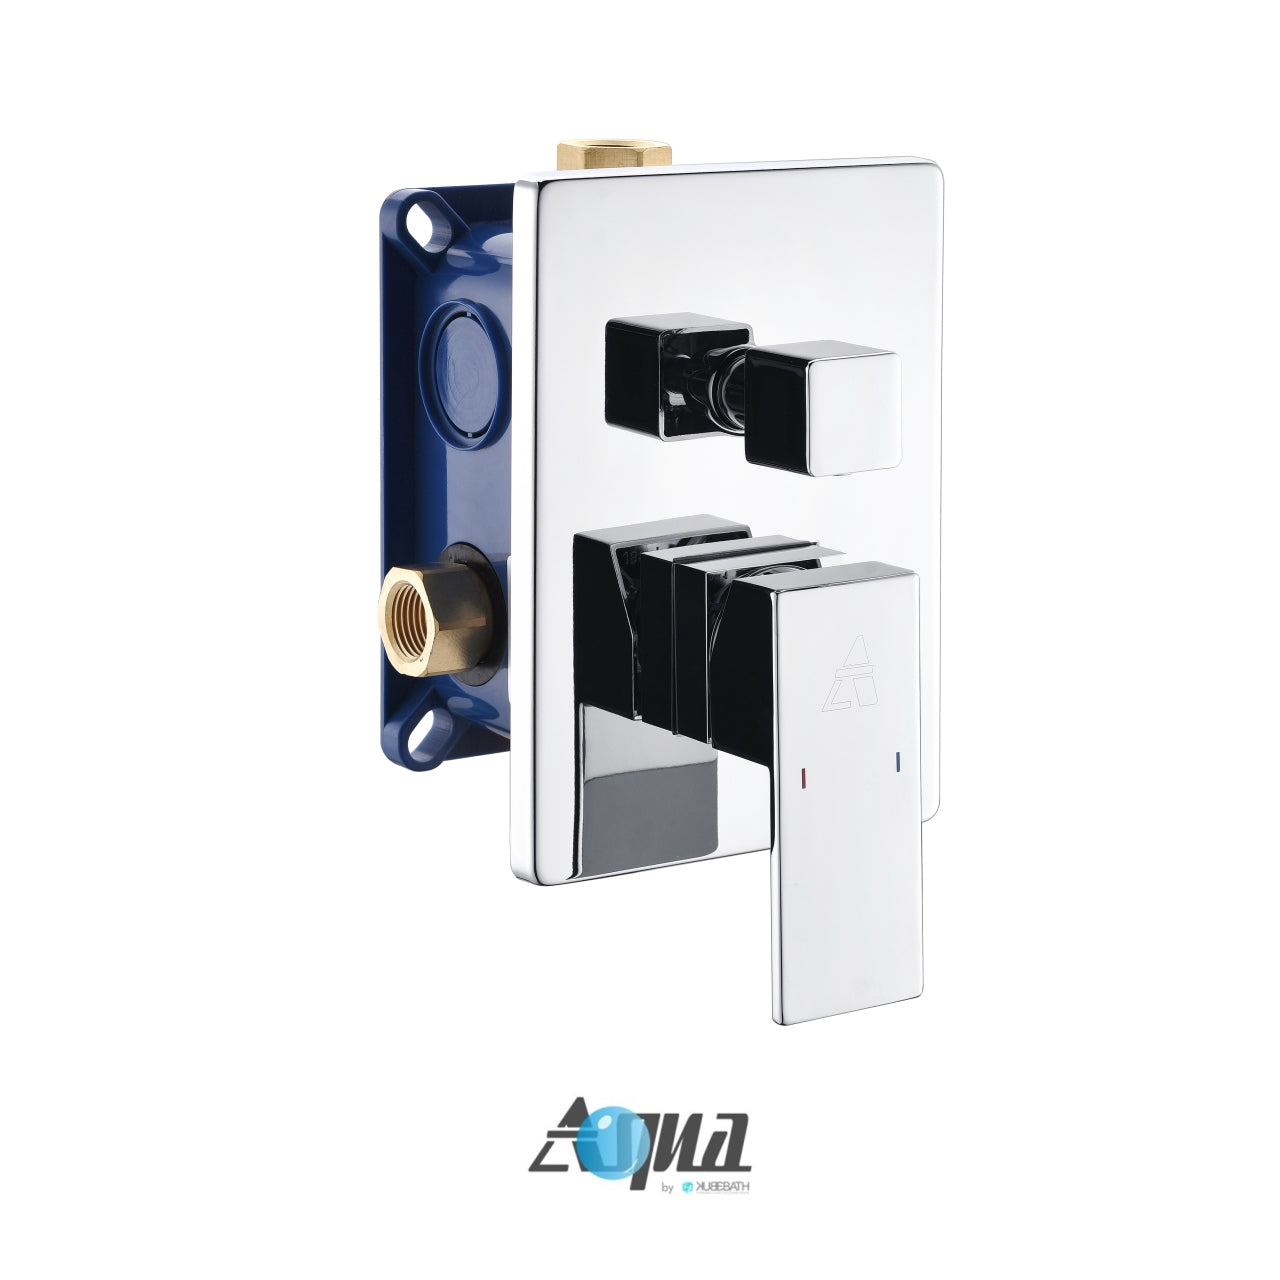 Aqua Piazza Brass Shower Set with Ceiling Mount Square Rain Shower (Tub Filler and 4 Body Jets) - Home and Bath Depot